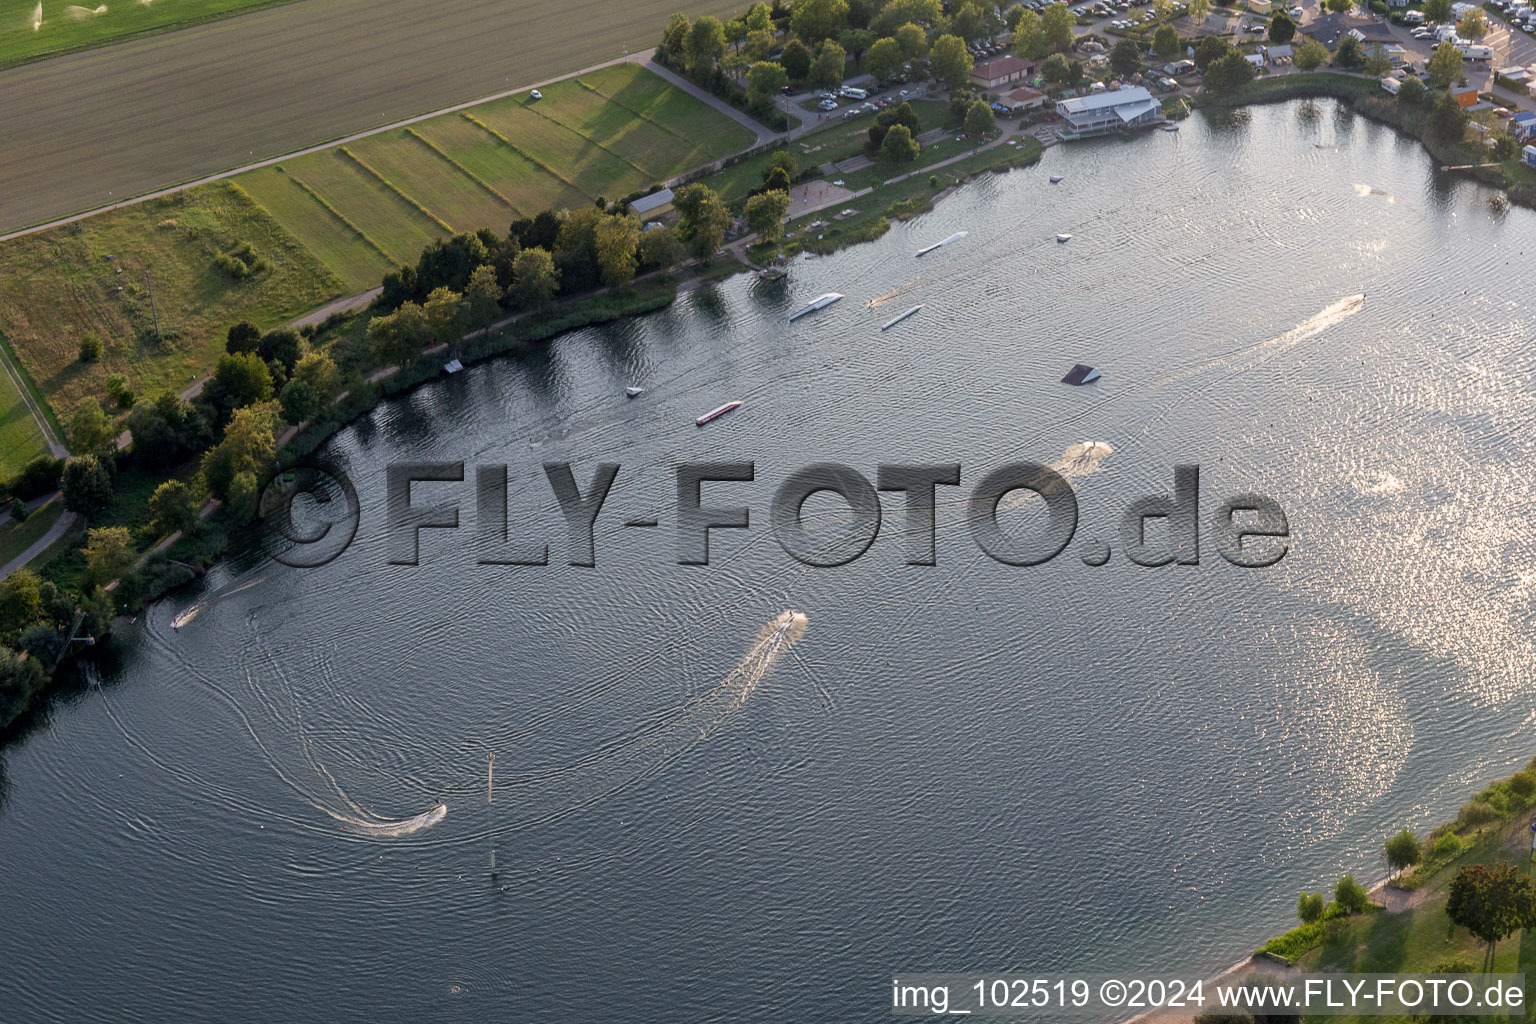 St. Leoner See, water ski facility in the district Sankt Leon in St. Leon-Rot in the state Baden-Wuerttemberg, Germany seen from above